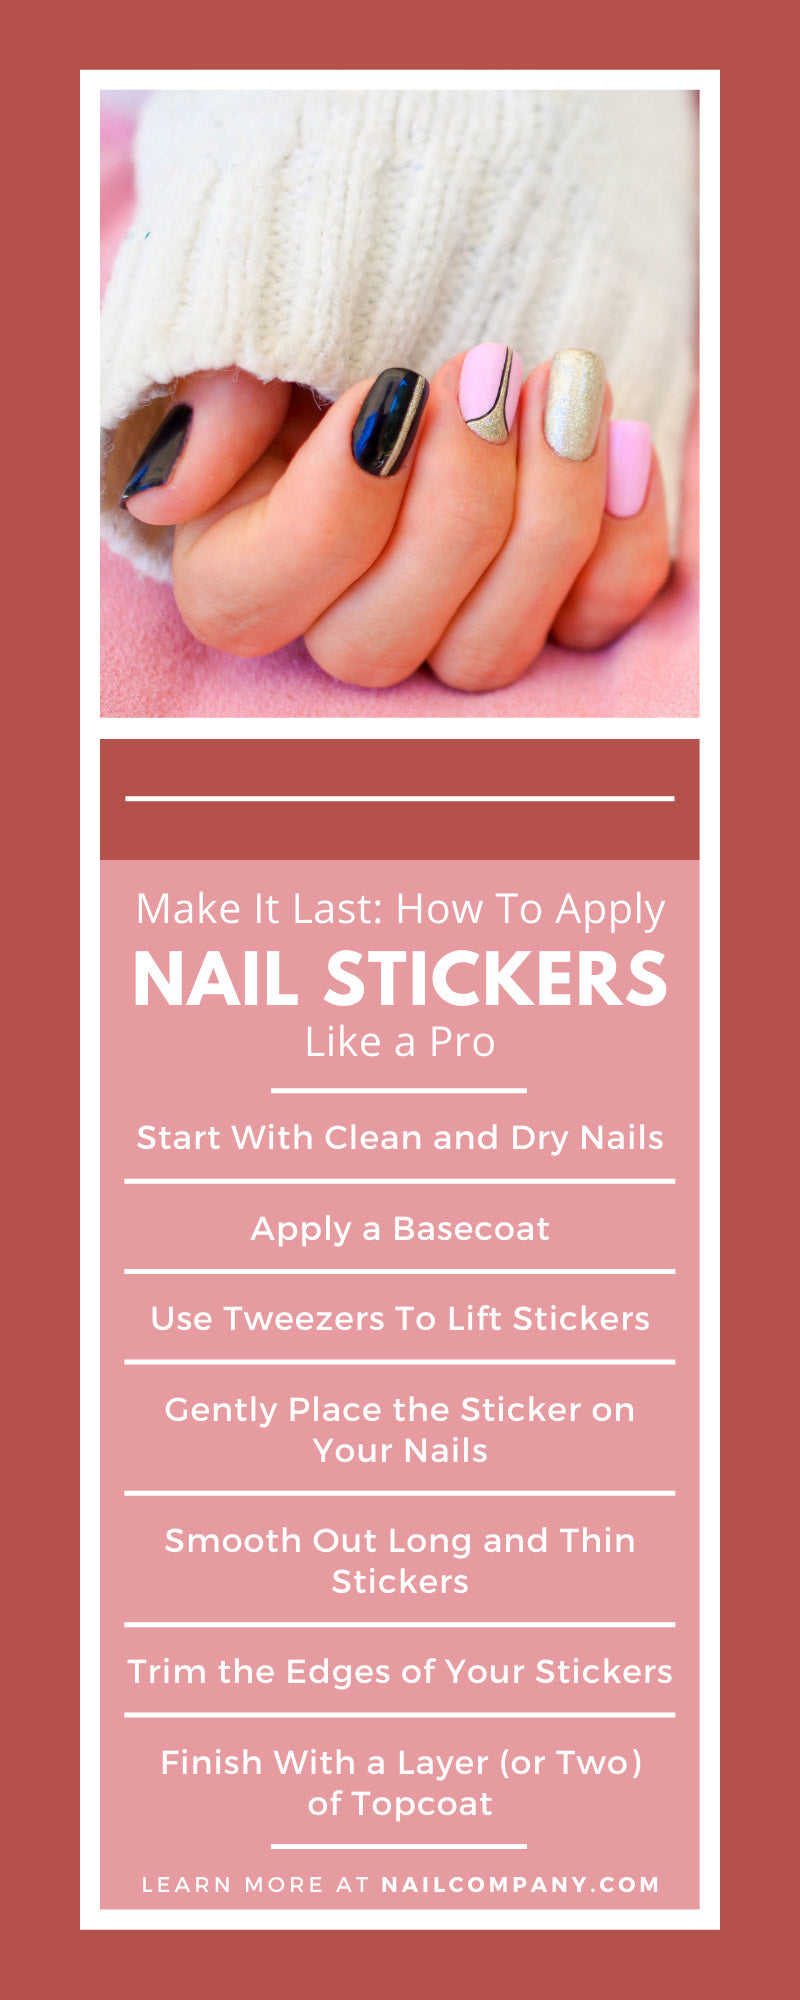 How to Create nail flowers for nail art designs « Nails & Manicure ::  WonderHowTo